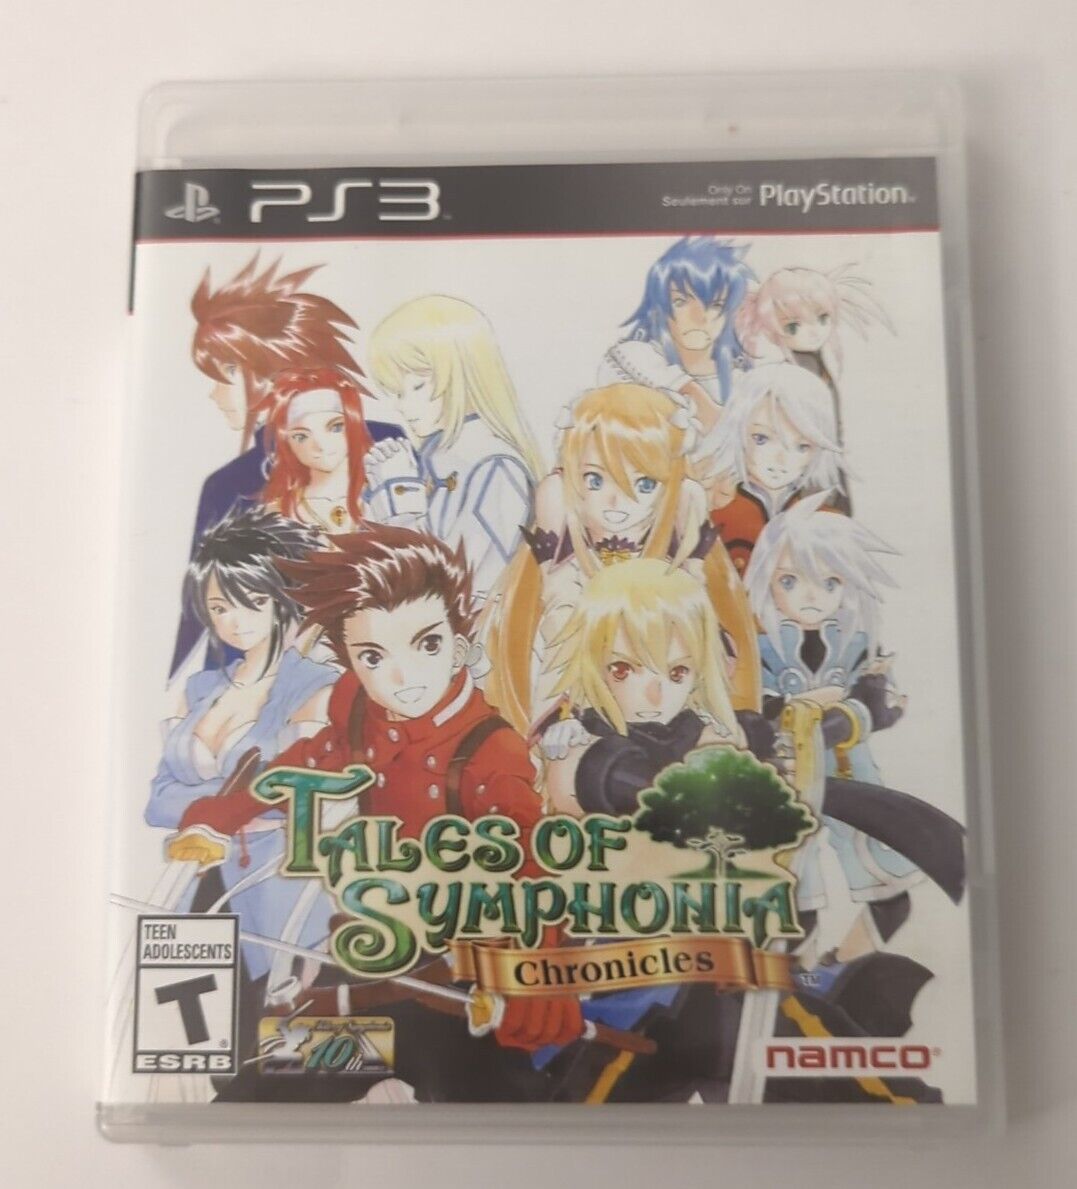 PS3 - Tales of Symphonia Chronicles (Sony PlayStation 3, PS3) Case + Disc